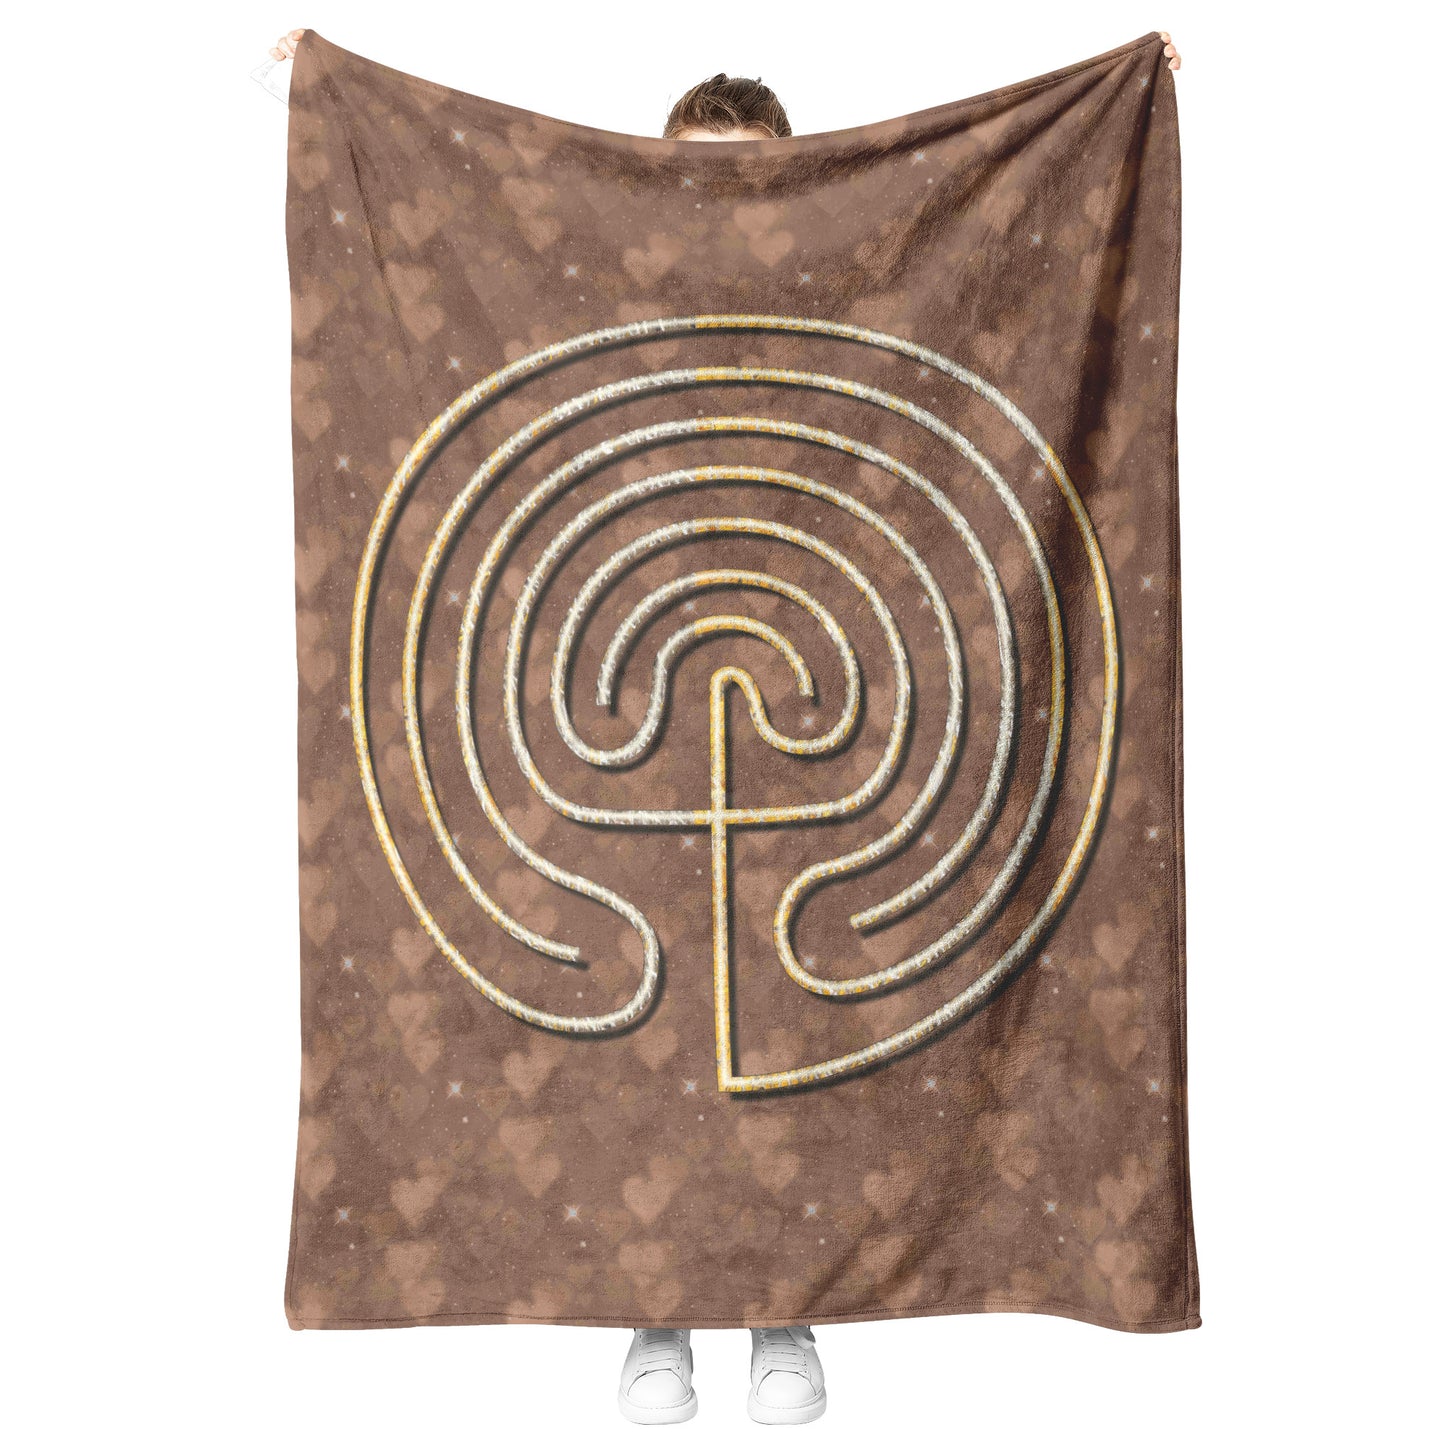 Cretian Labyrinth Therapy Blanket - Brown